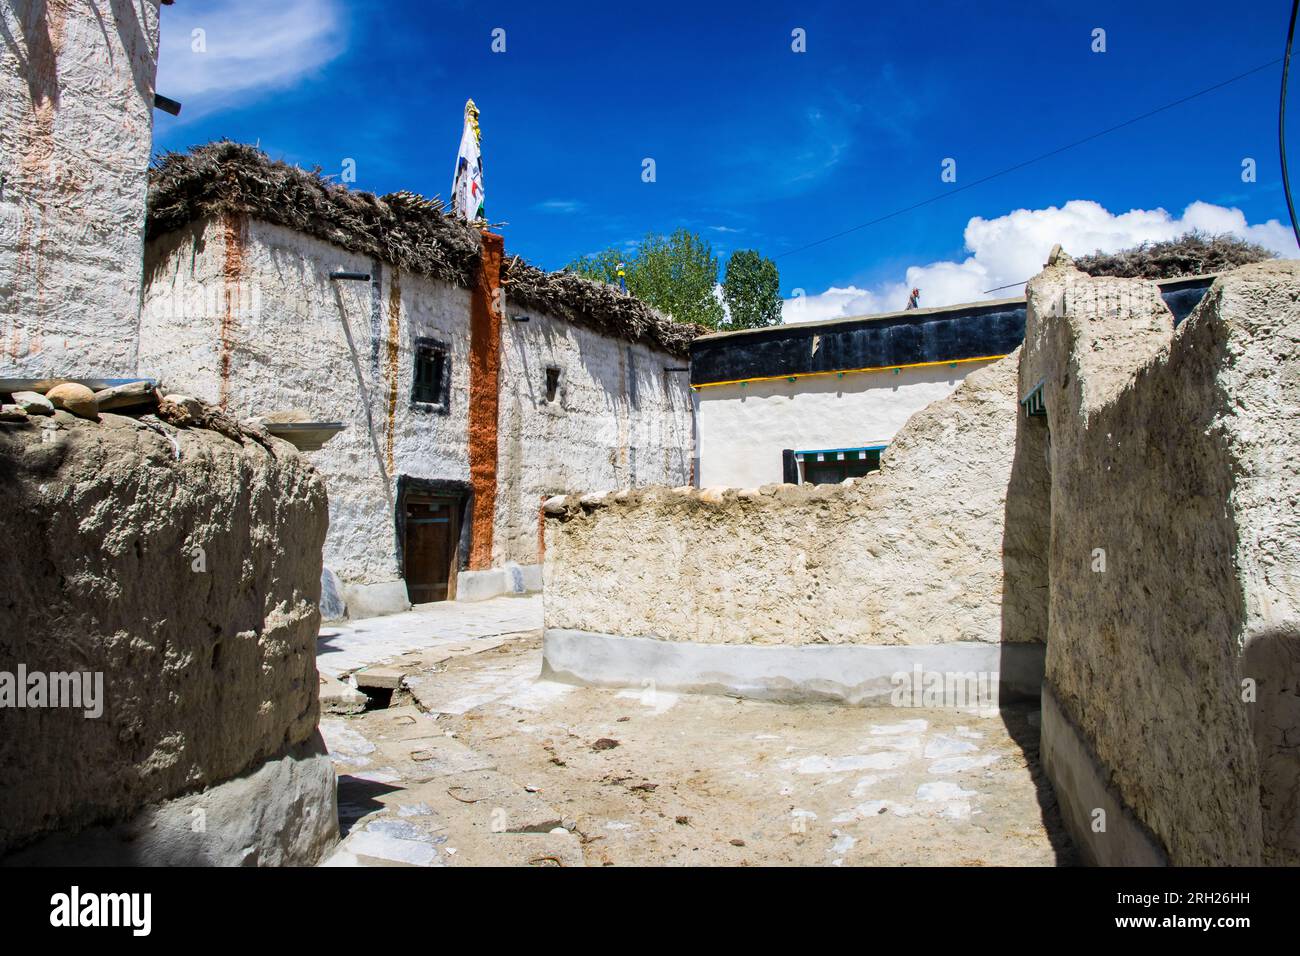 Alleyways, Old House, Monastery, Inside the Wall Kingdom of Lo in Lo Manthang, Upper Mustang, Nepal Stock Photo